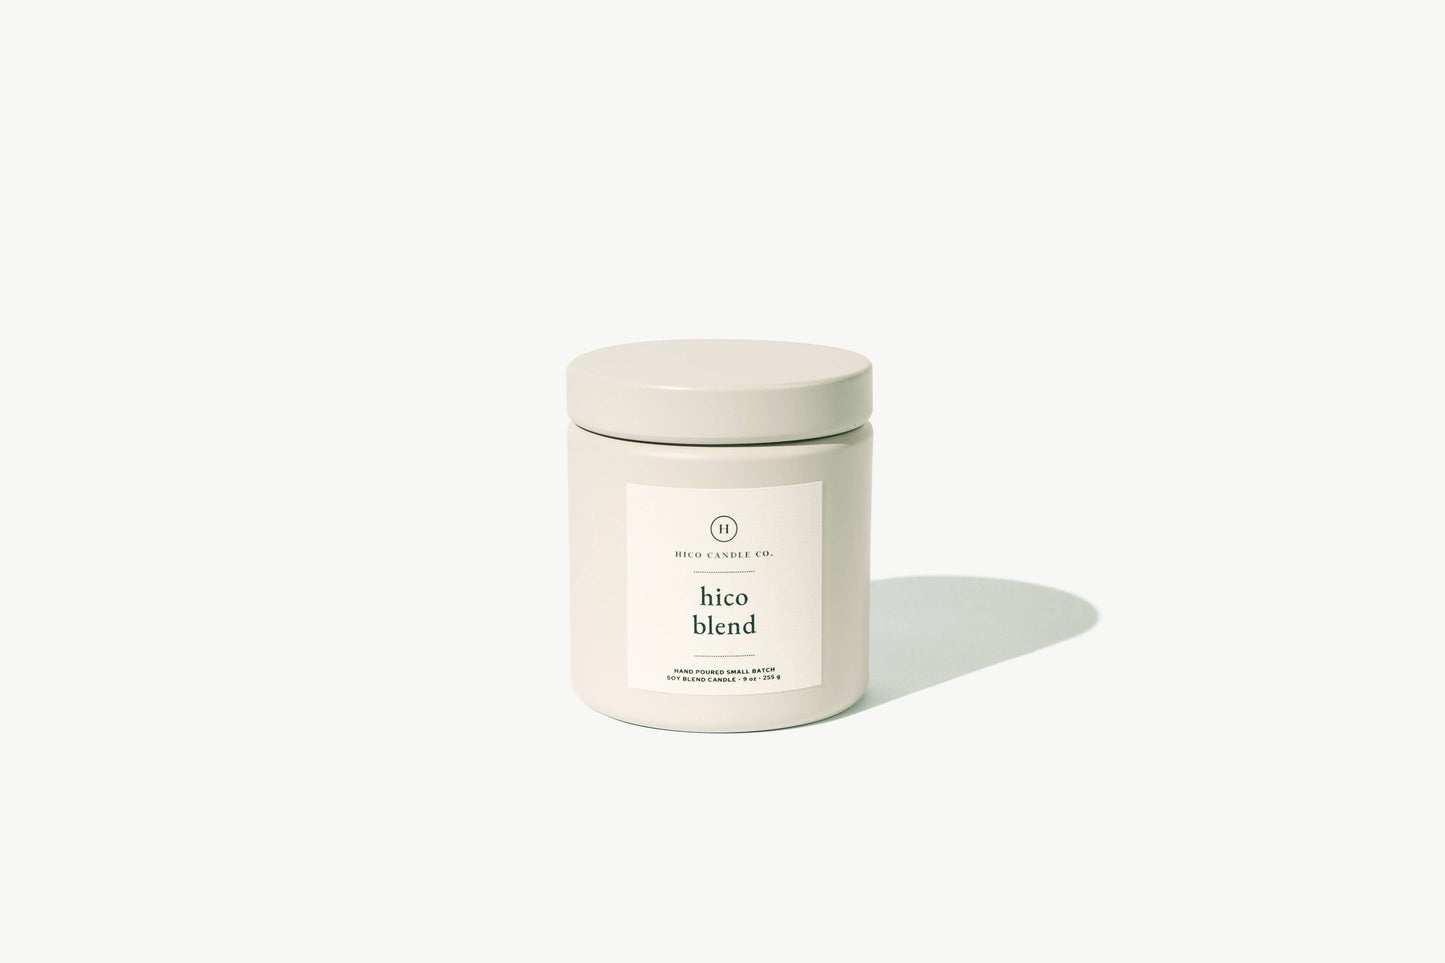 Hico Candle Co. - Hico Blend Candle